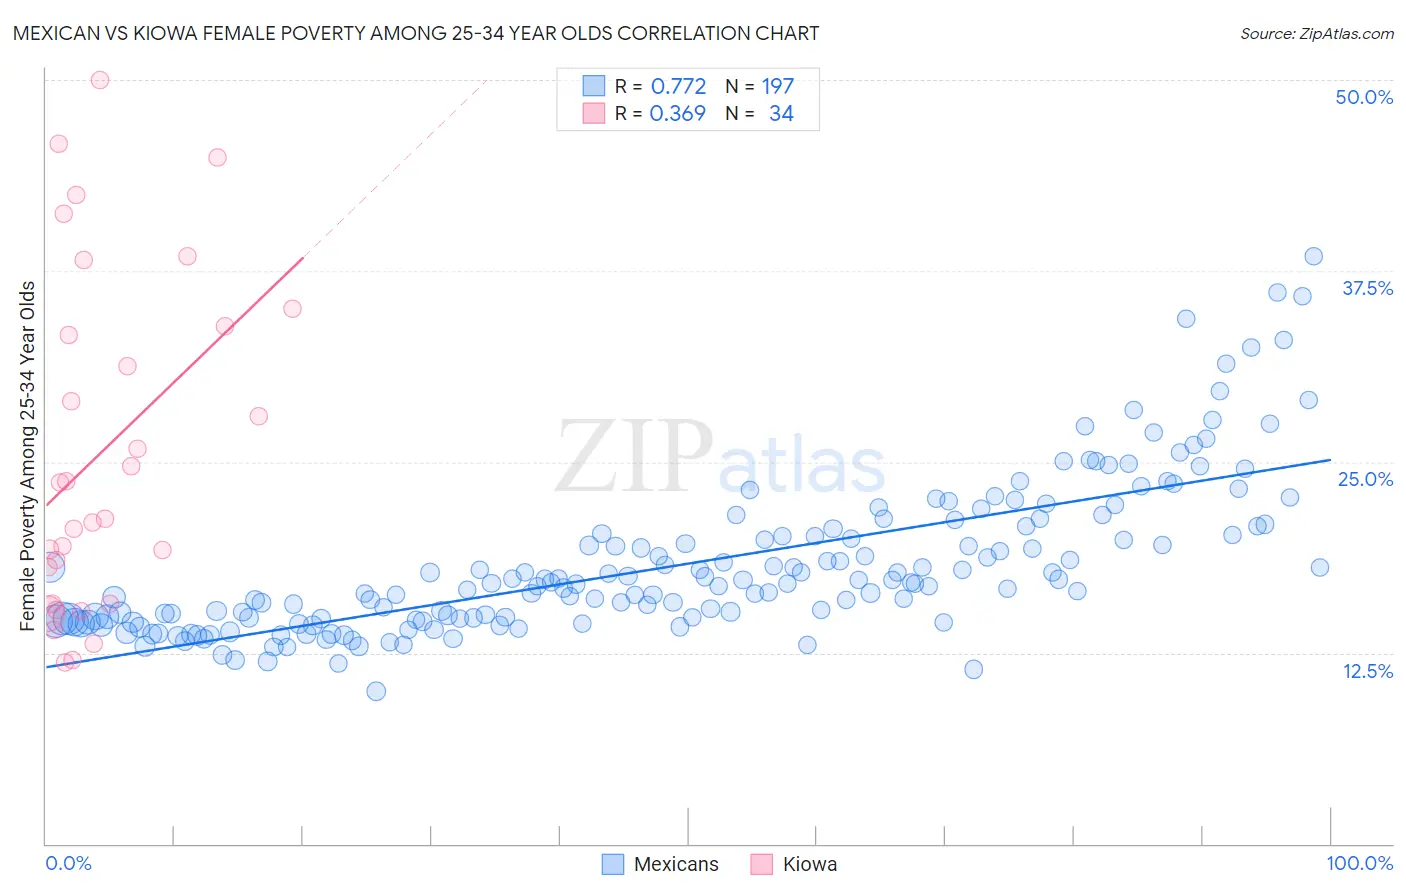 Mexican vs Kiowa Female Poverty Among 25-34 Year Olds